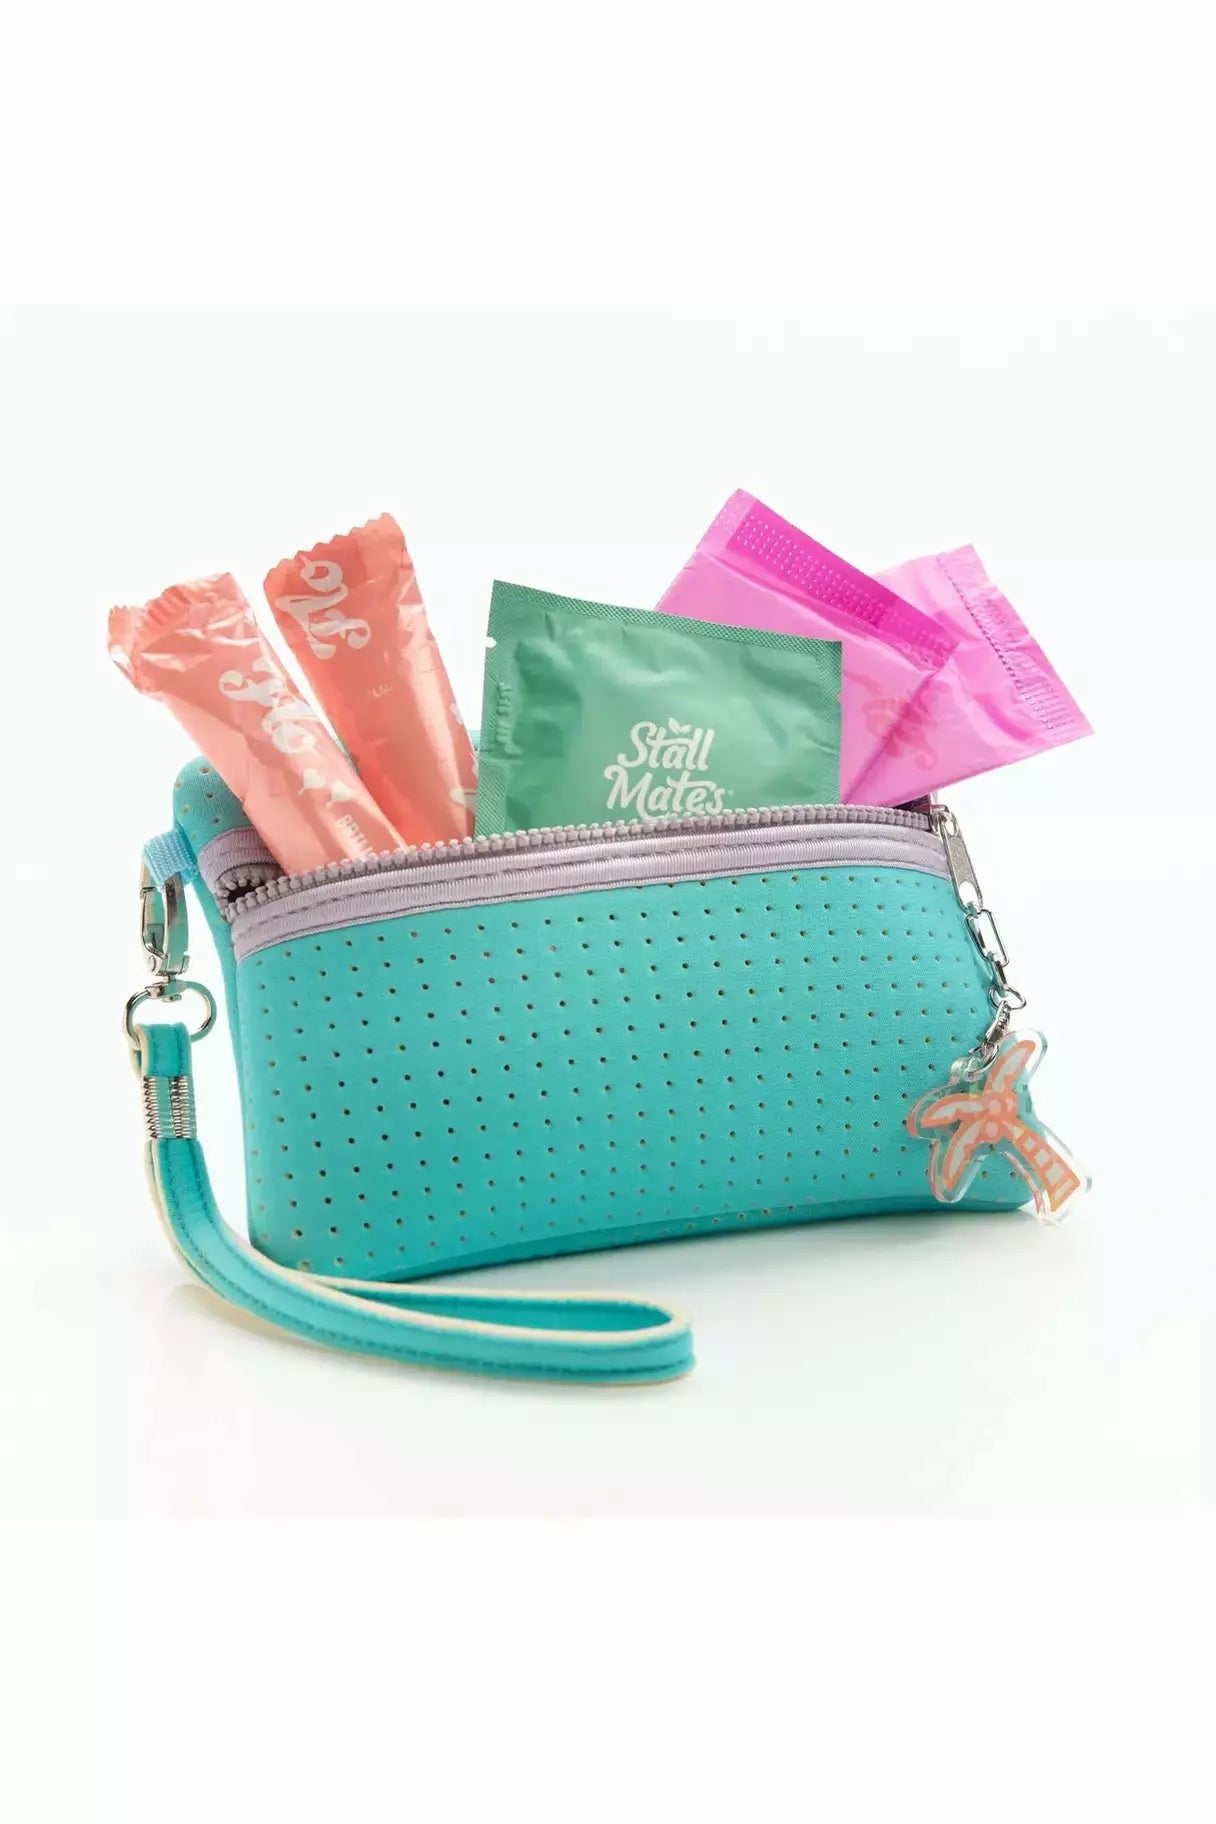 Just In Case Bag - Personal Care Kit for Tweens & Teens